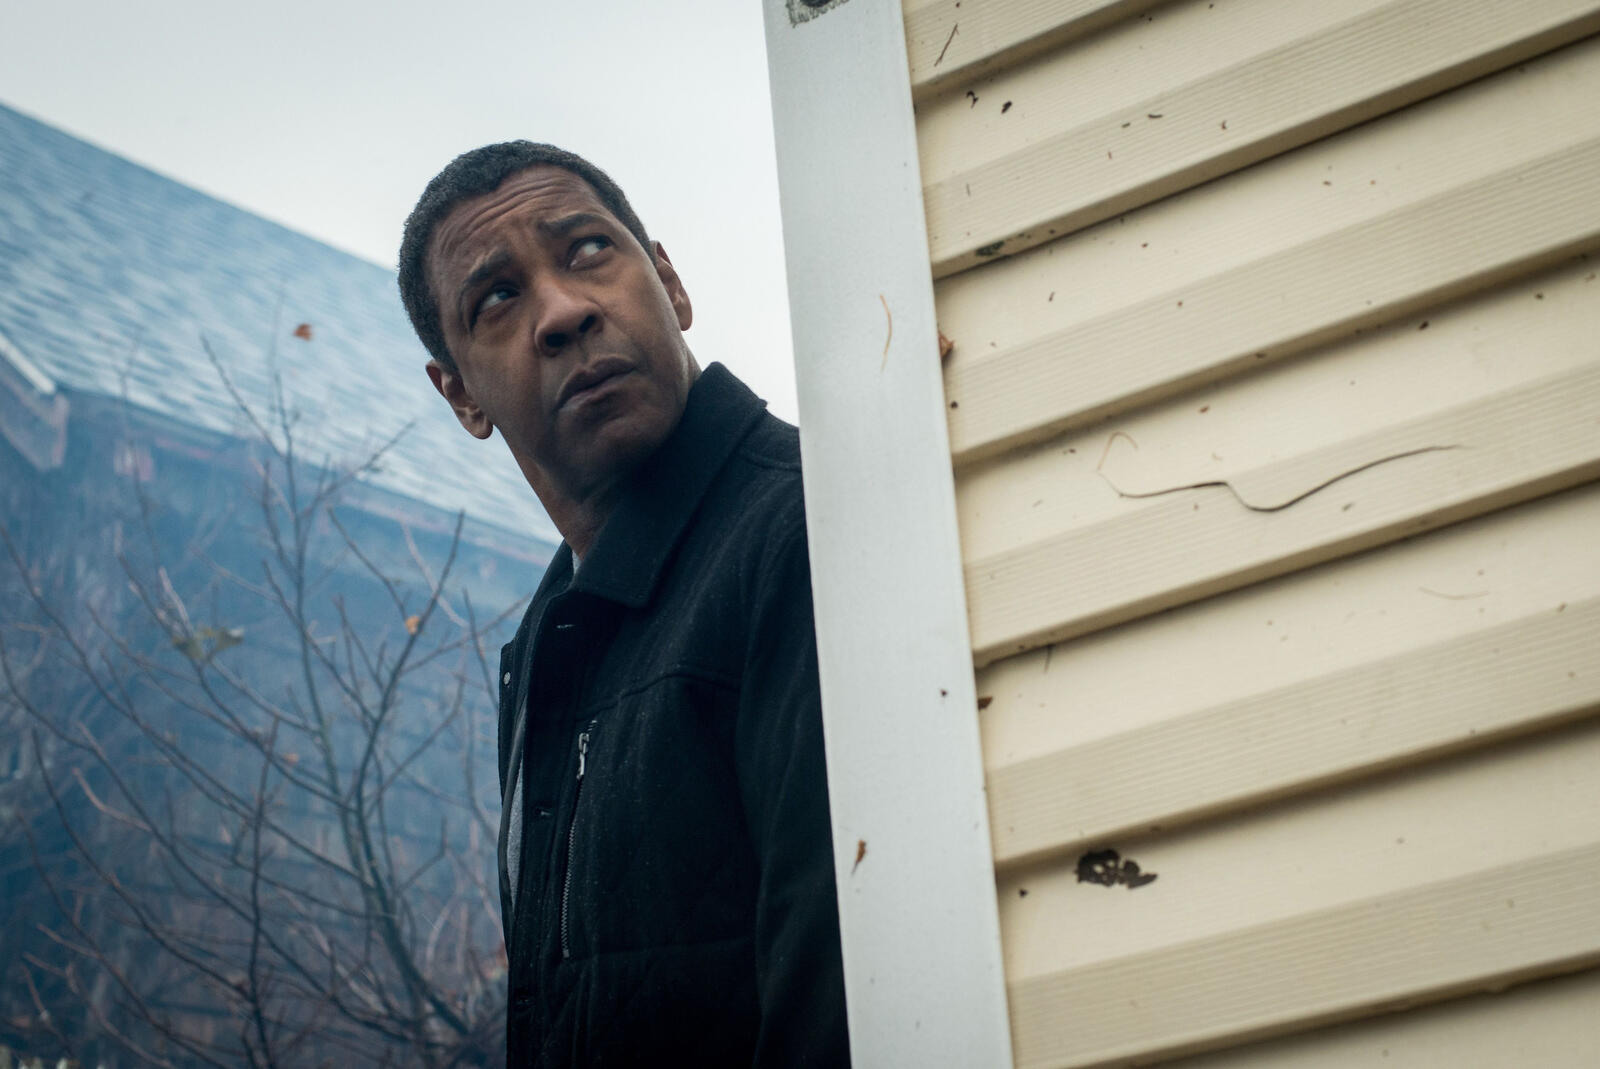 Wallpapers movies the equalizer 2 denzel washington on the desktop